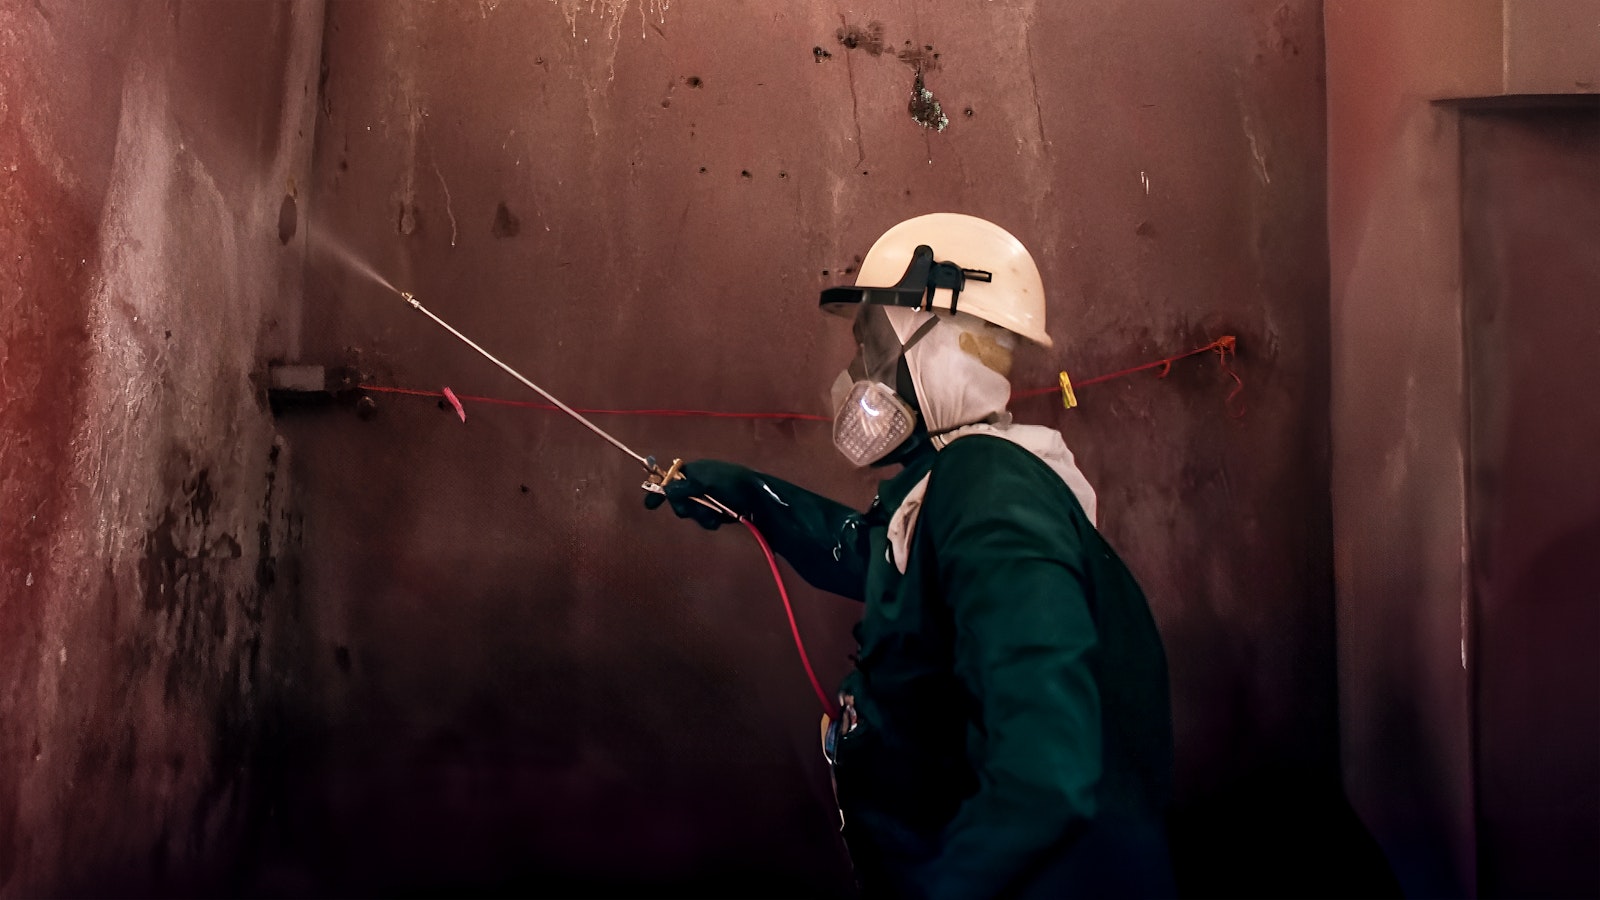 A professional sprayer wearing a green jumpsuit and protective gear sprays walls with insecticide with a long orange hose.